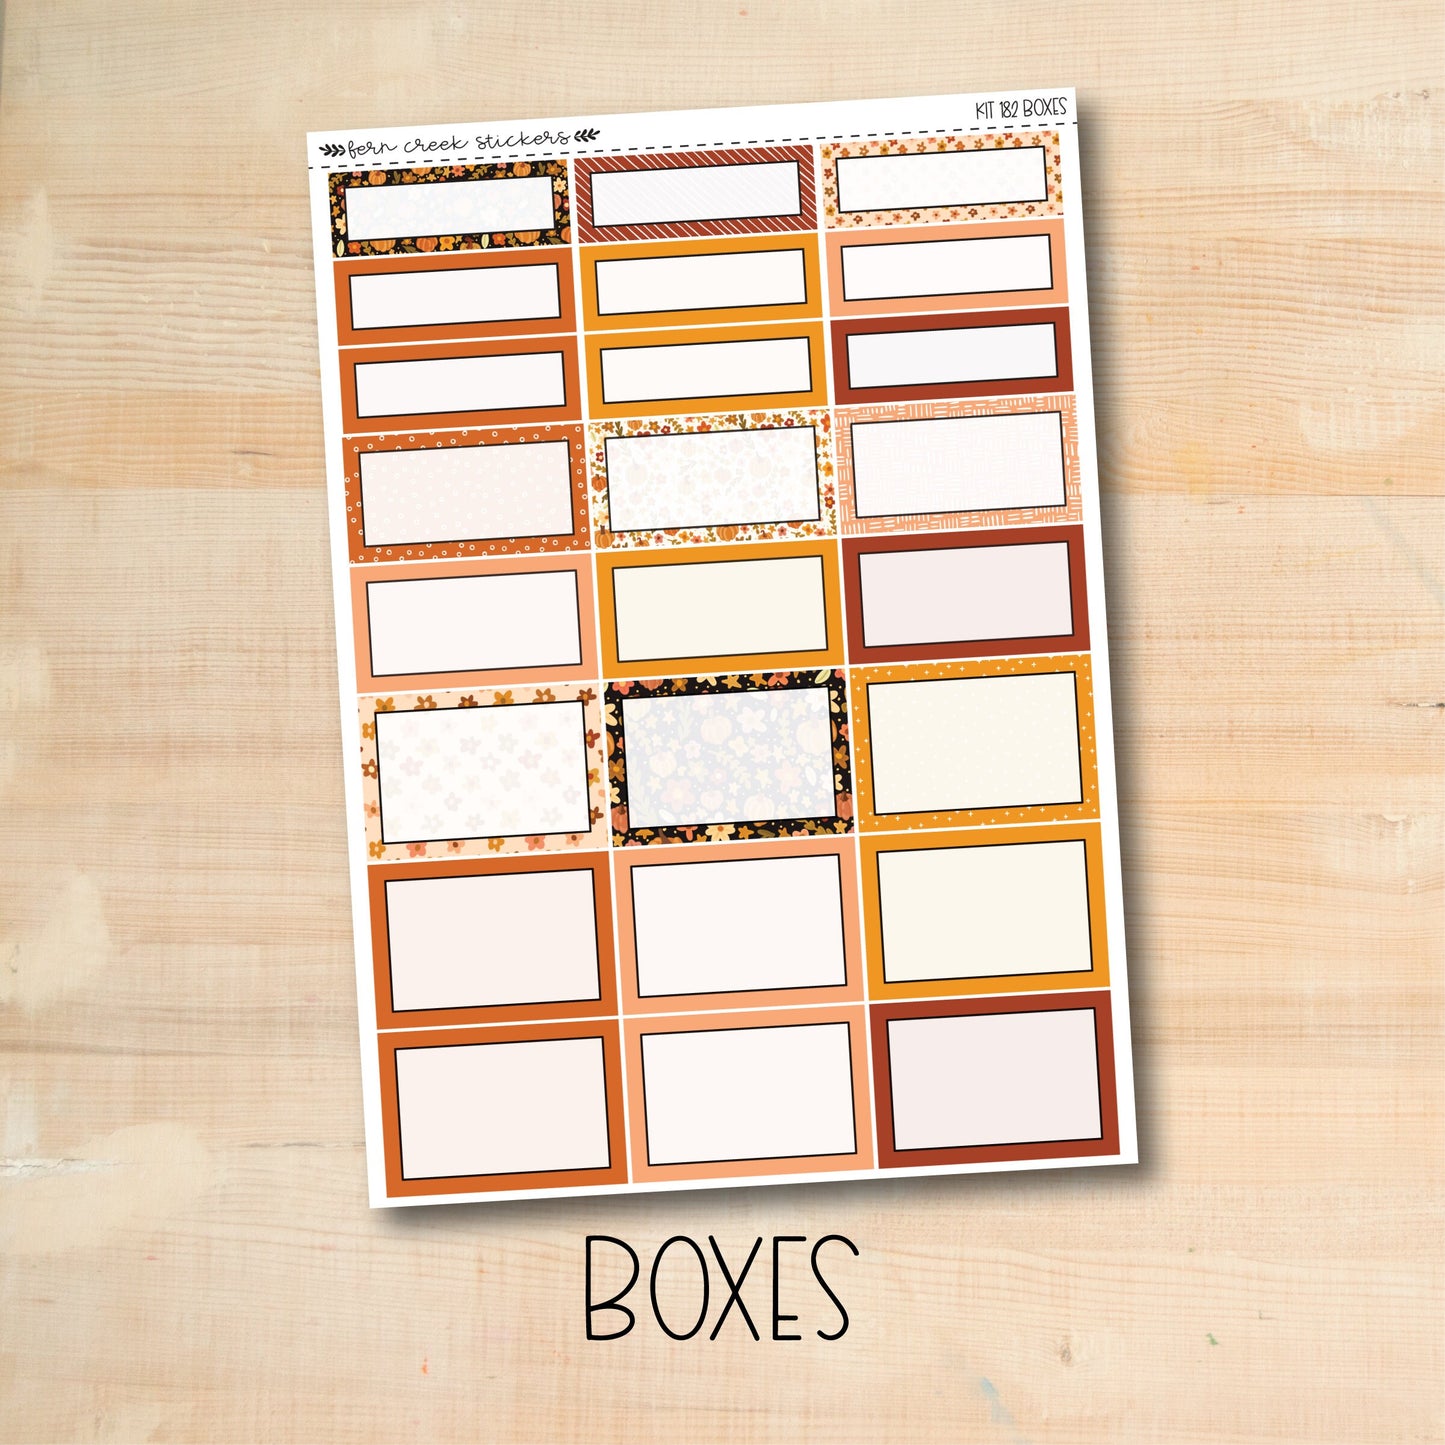 KIT-182 || HELLO PUMPKIN weekly planner kit for Erin Condren, Plum Paper, MakseLife and more!